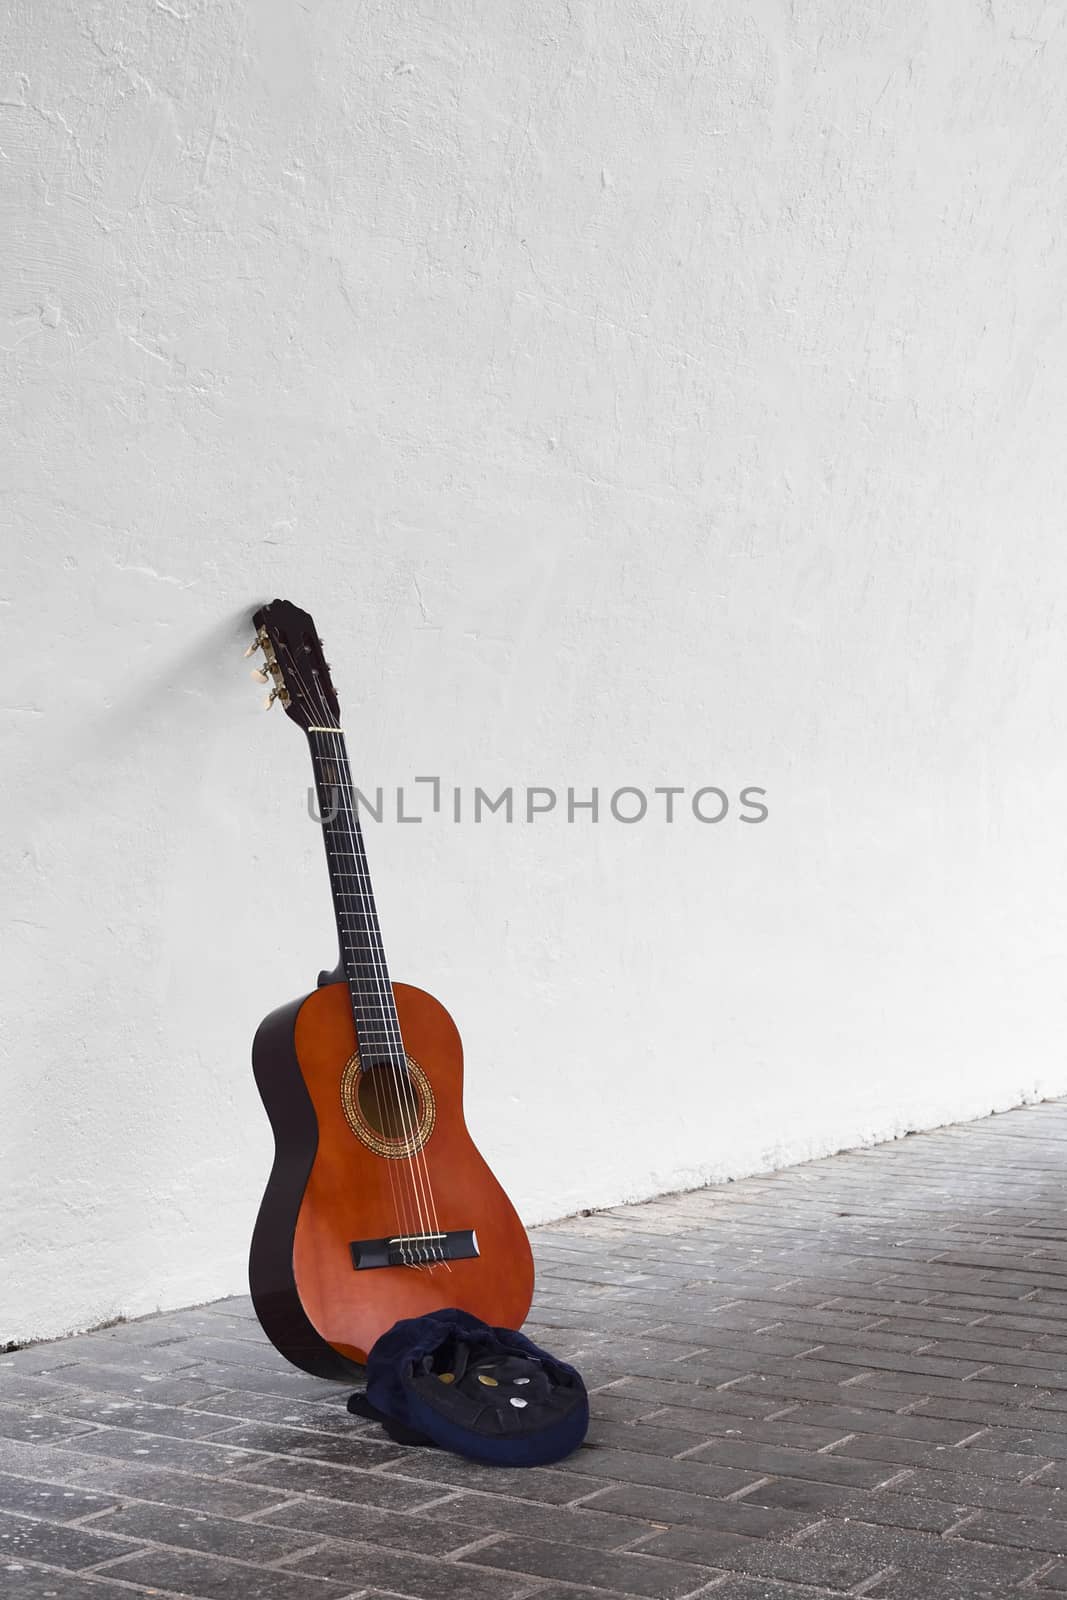 Guitar leaning against white wall with blue hat containing some coins in front 